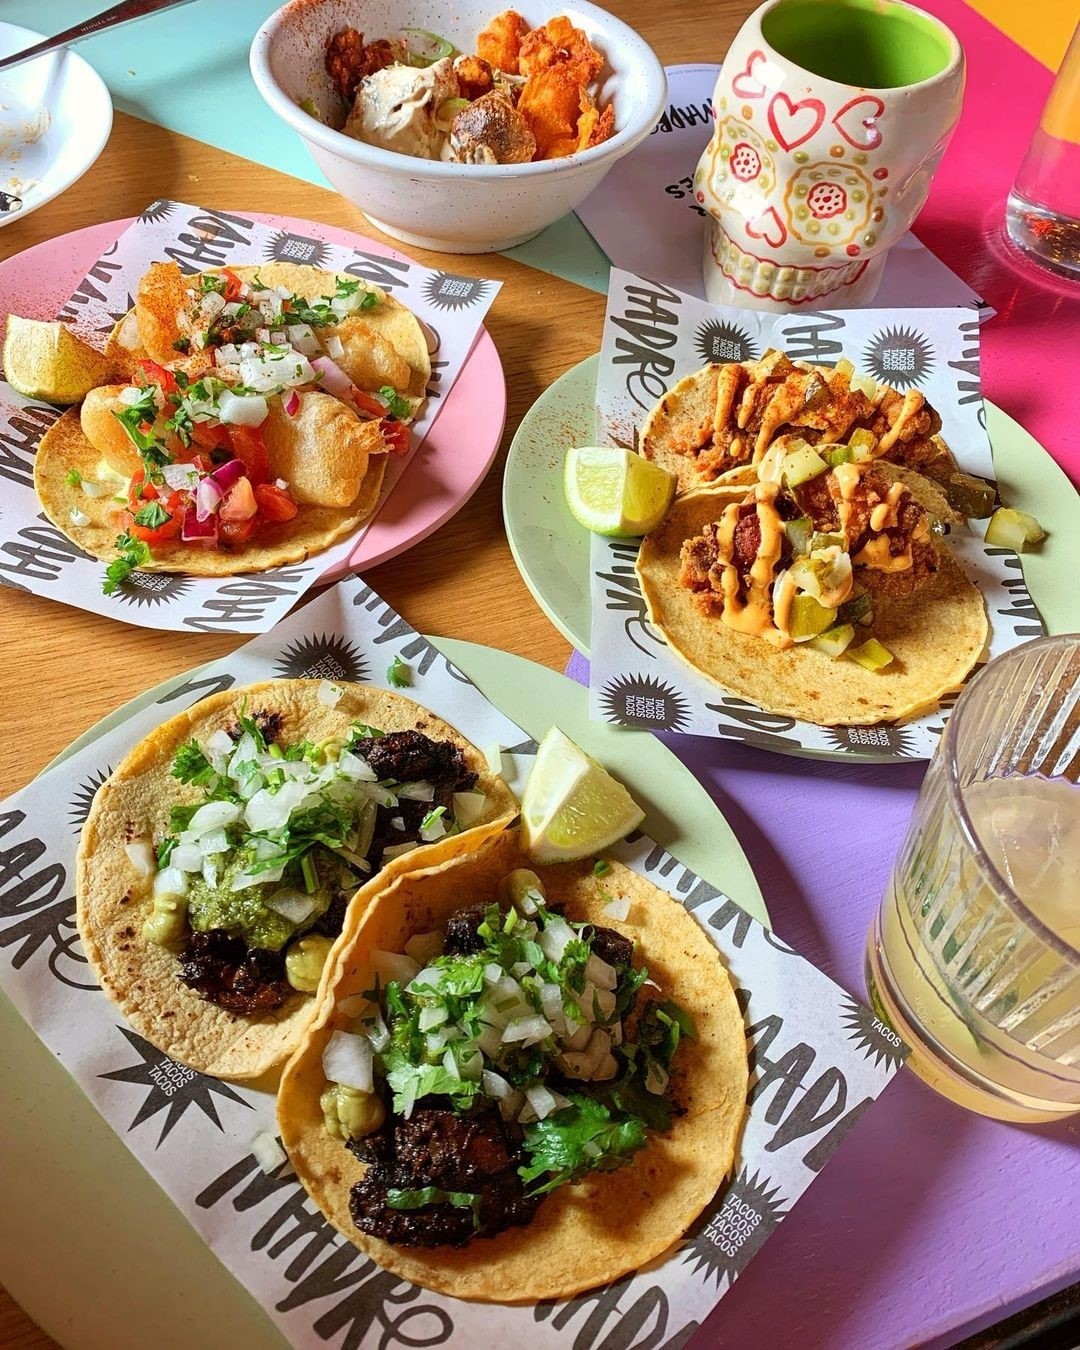 You can get paid £1000 to travel the UK eating tacos and drinking margaritas, The Manc